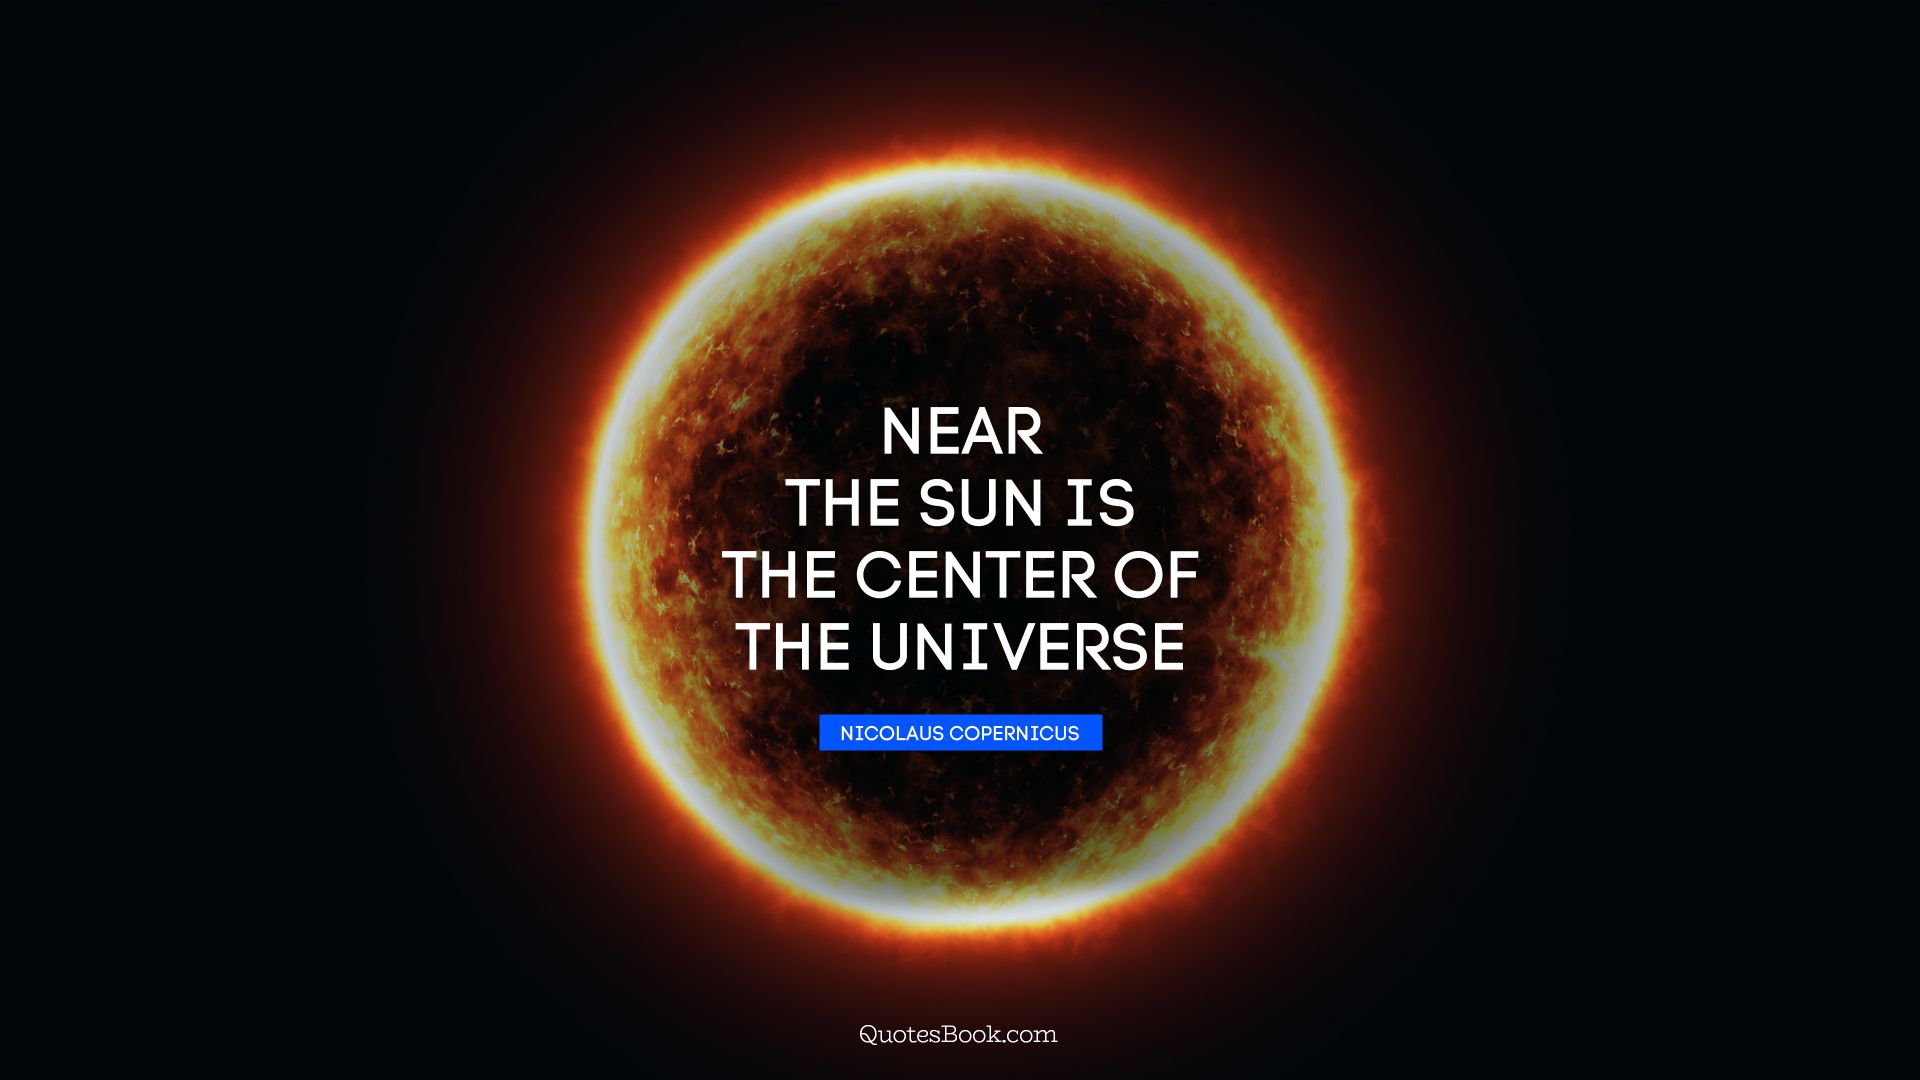 Near the sun is the center of the universe. - Quote by Nicolaus Copernicus